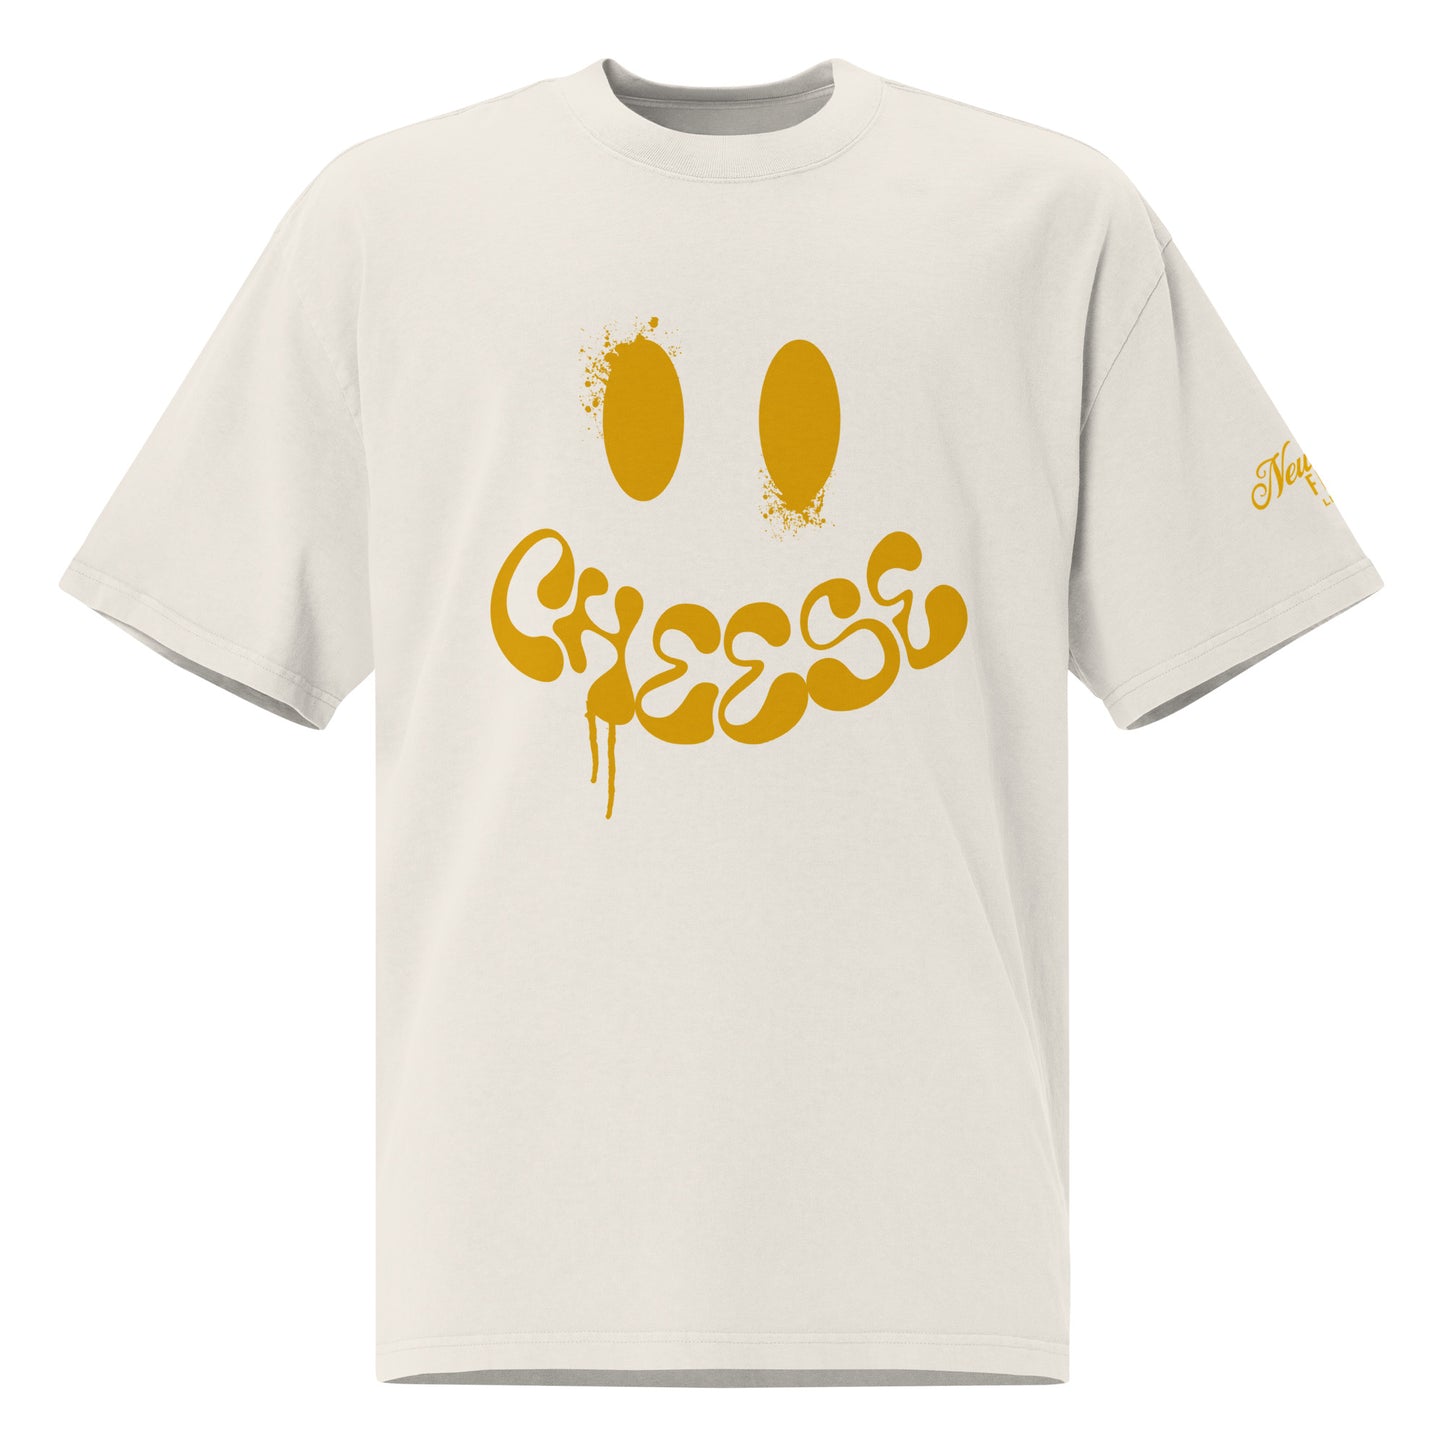 Cheese Oversized Faded T-Shirt